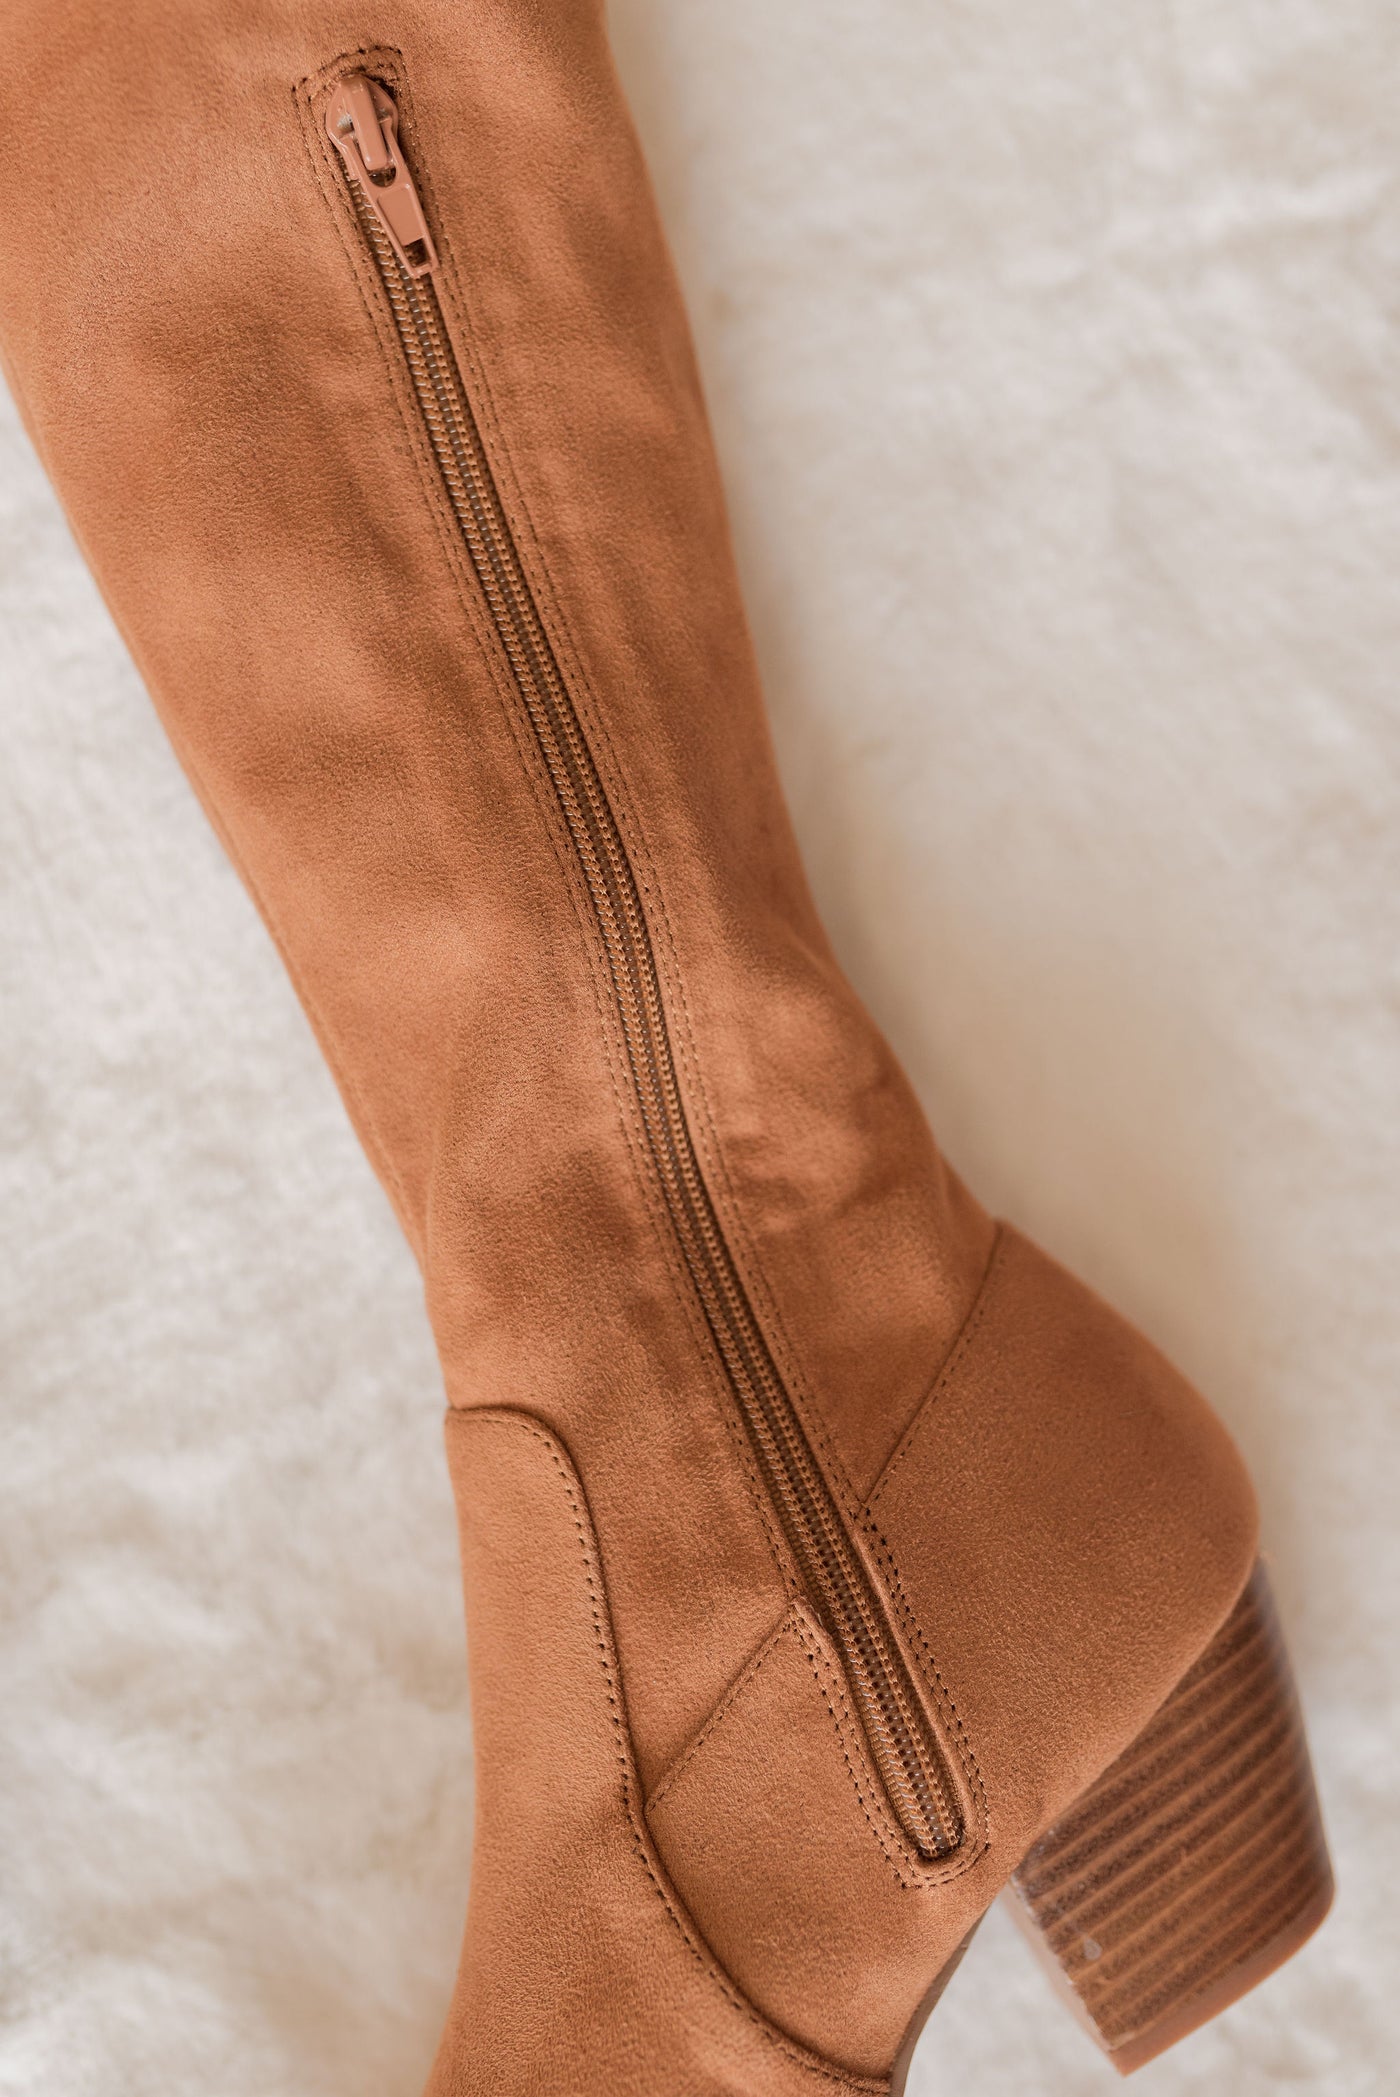 Matisse | Broadway Over-the-Knee Boot | Tan - Poppy and Stella